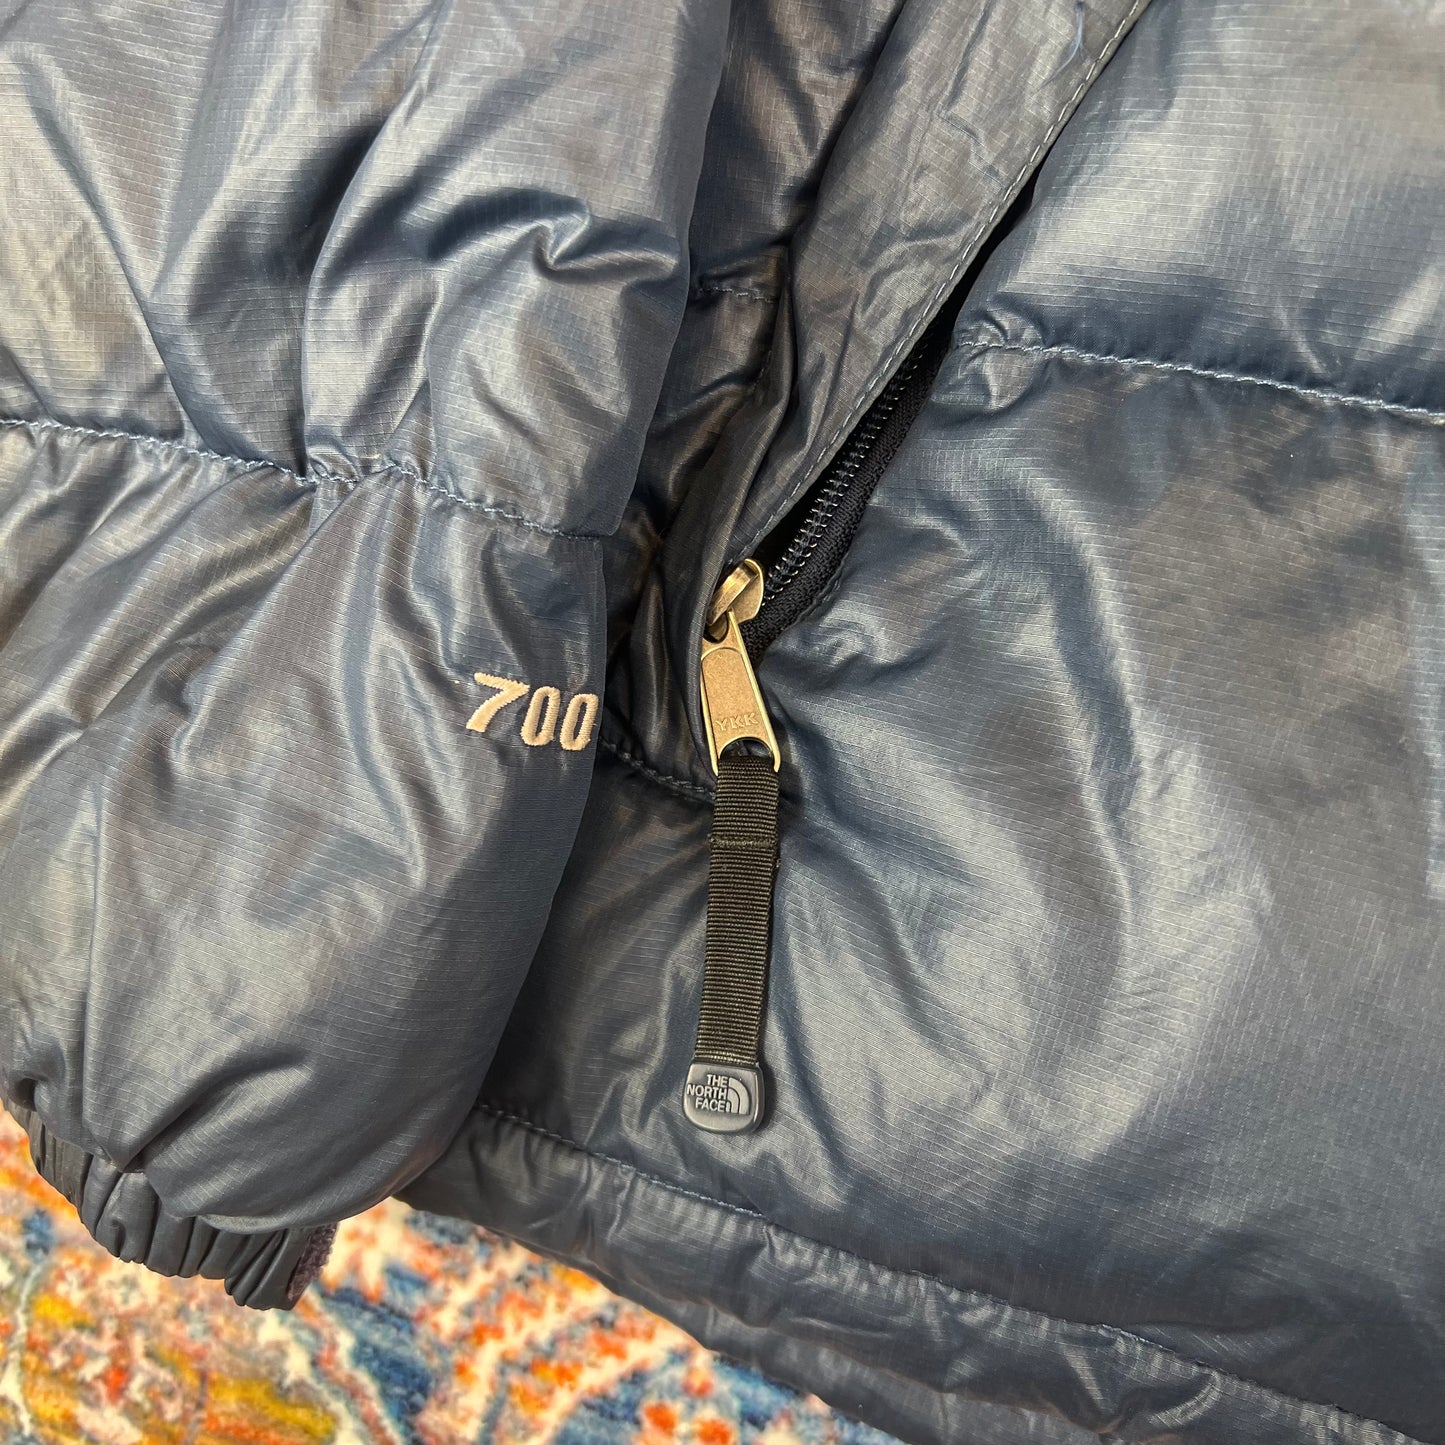 North Face Puffer 700 (XS-S)